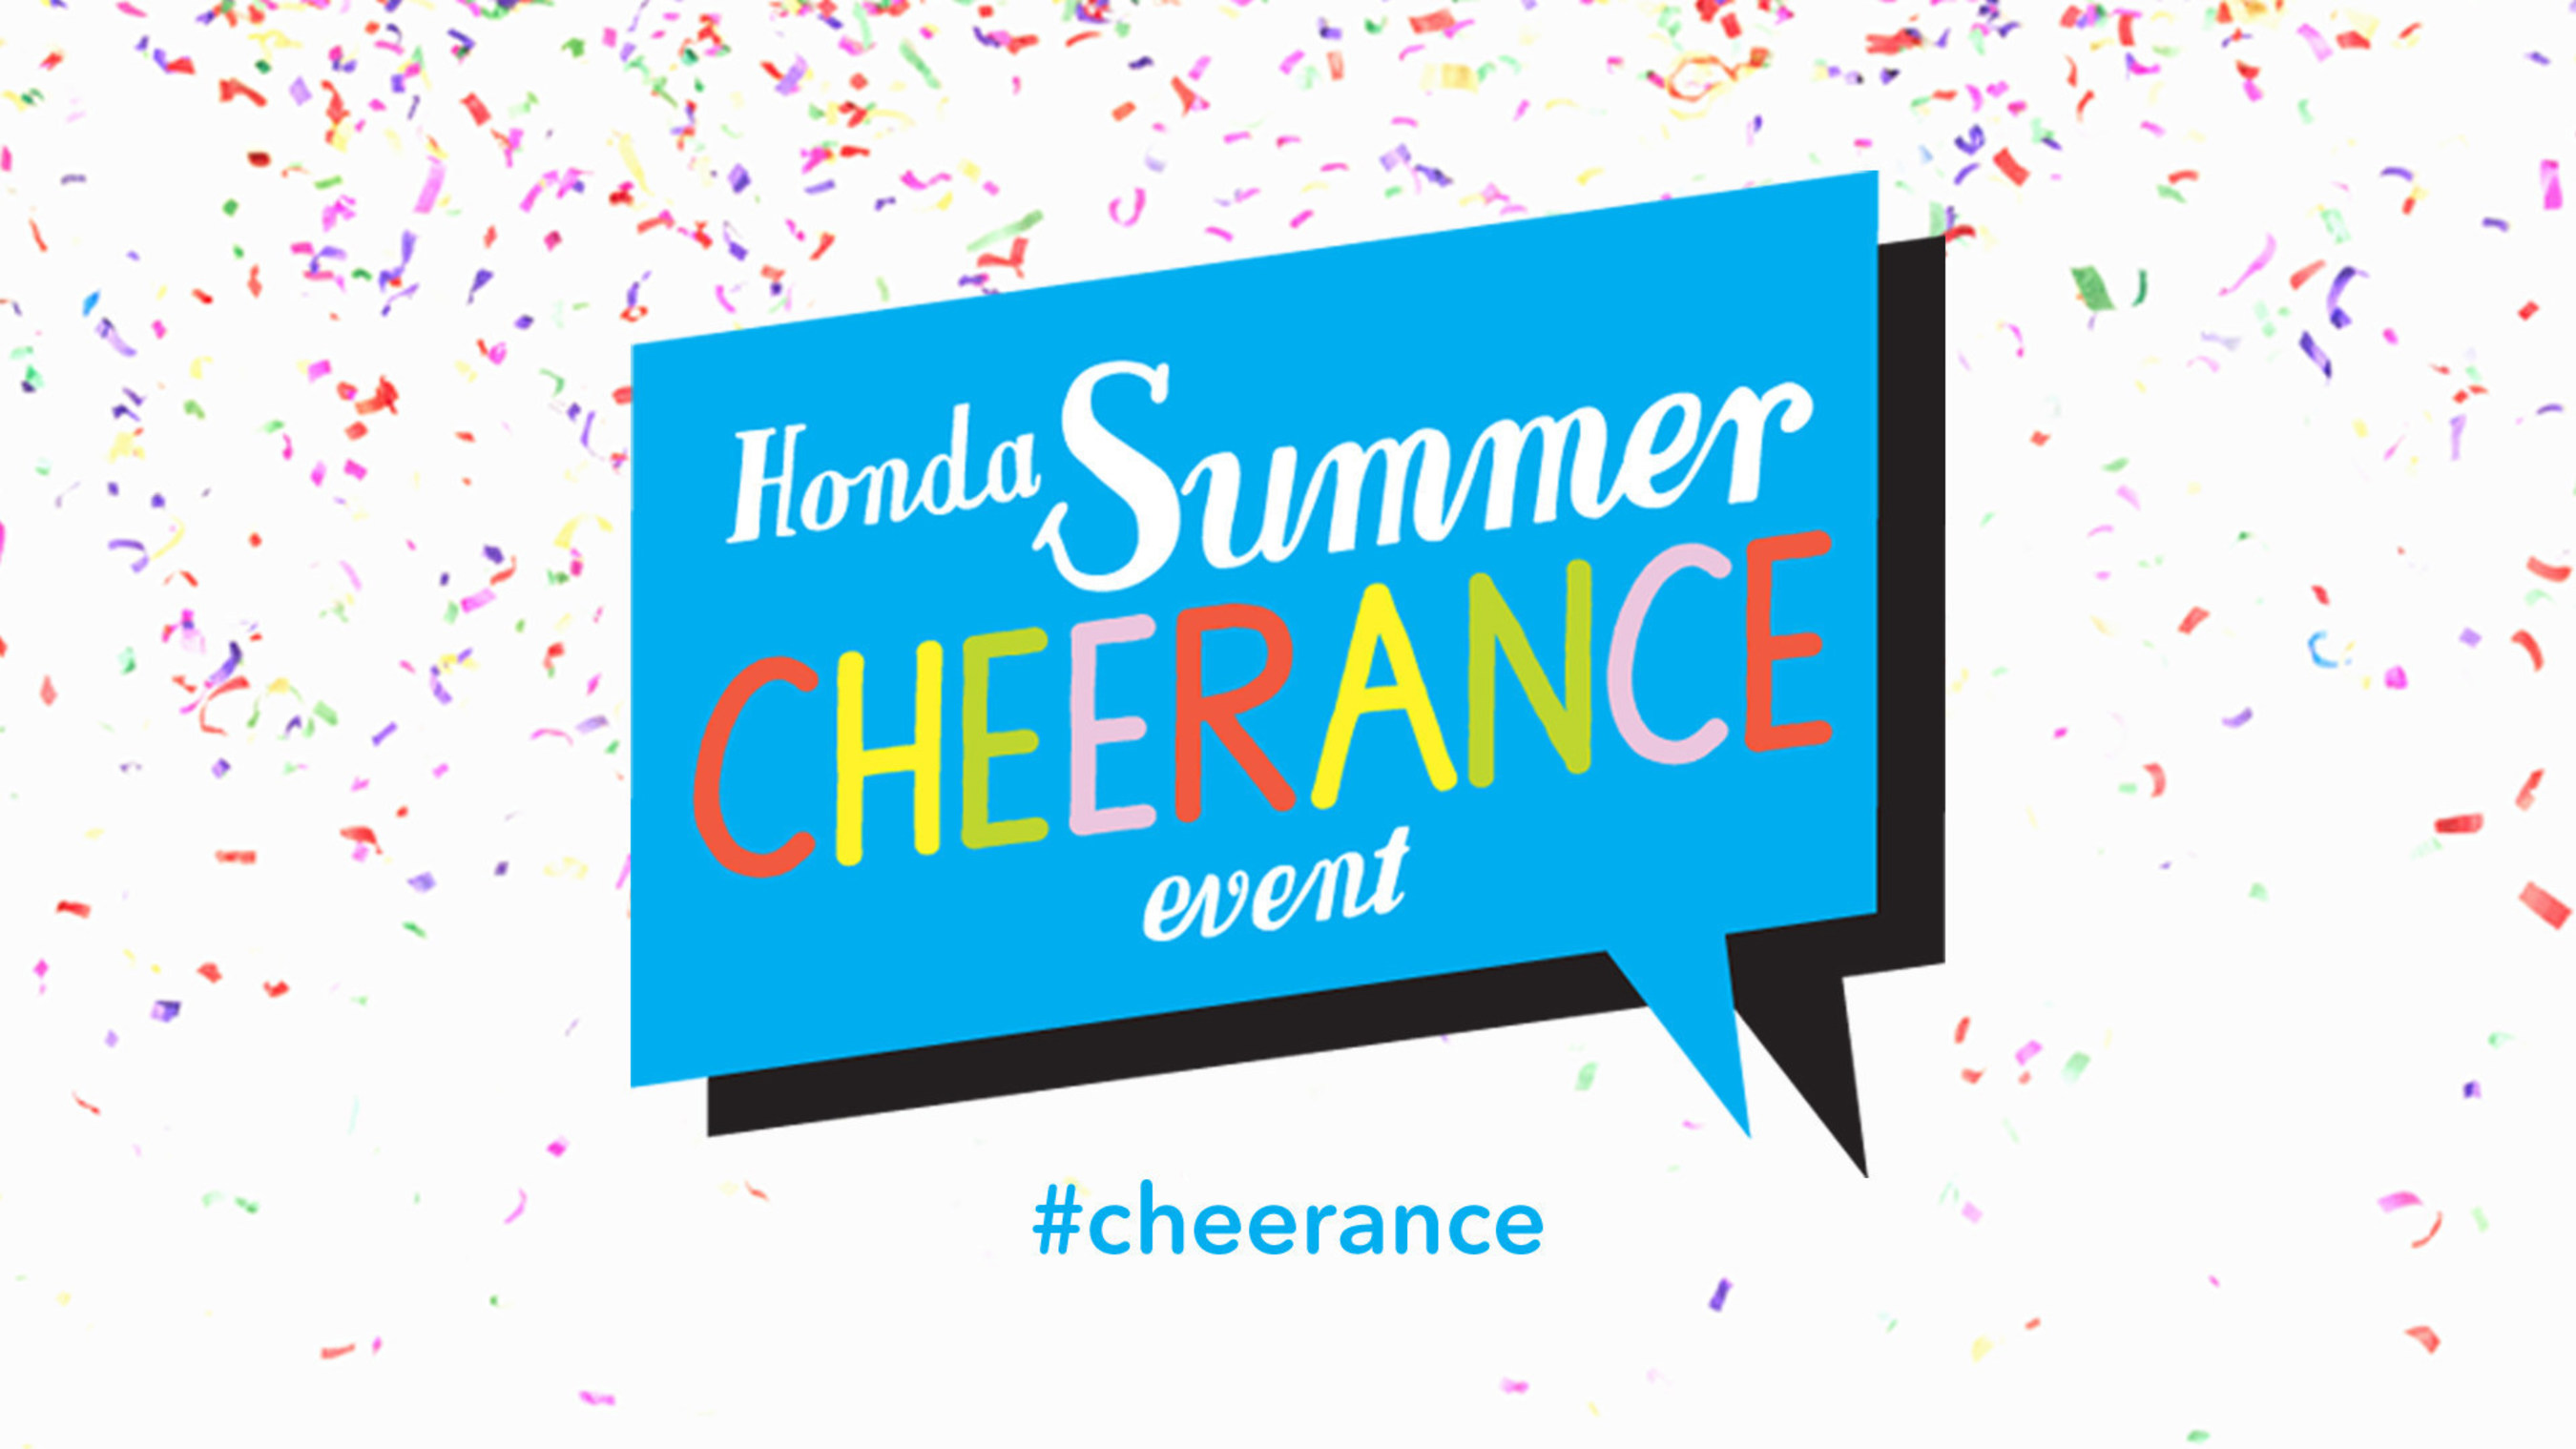 Honda Launches Summer #Cheerance Event Spreading Cheer to Three Million  People through Five-Day Honda Summer Clearance Event